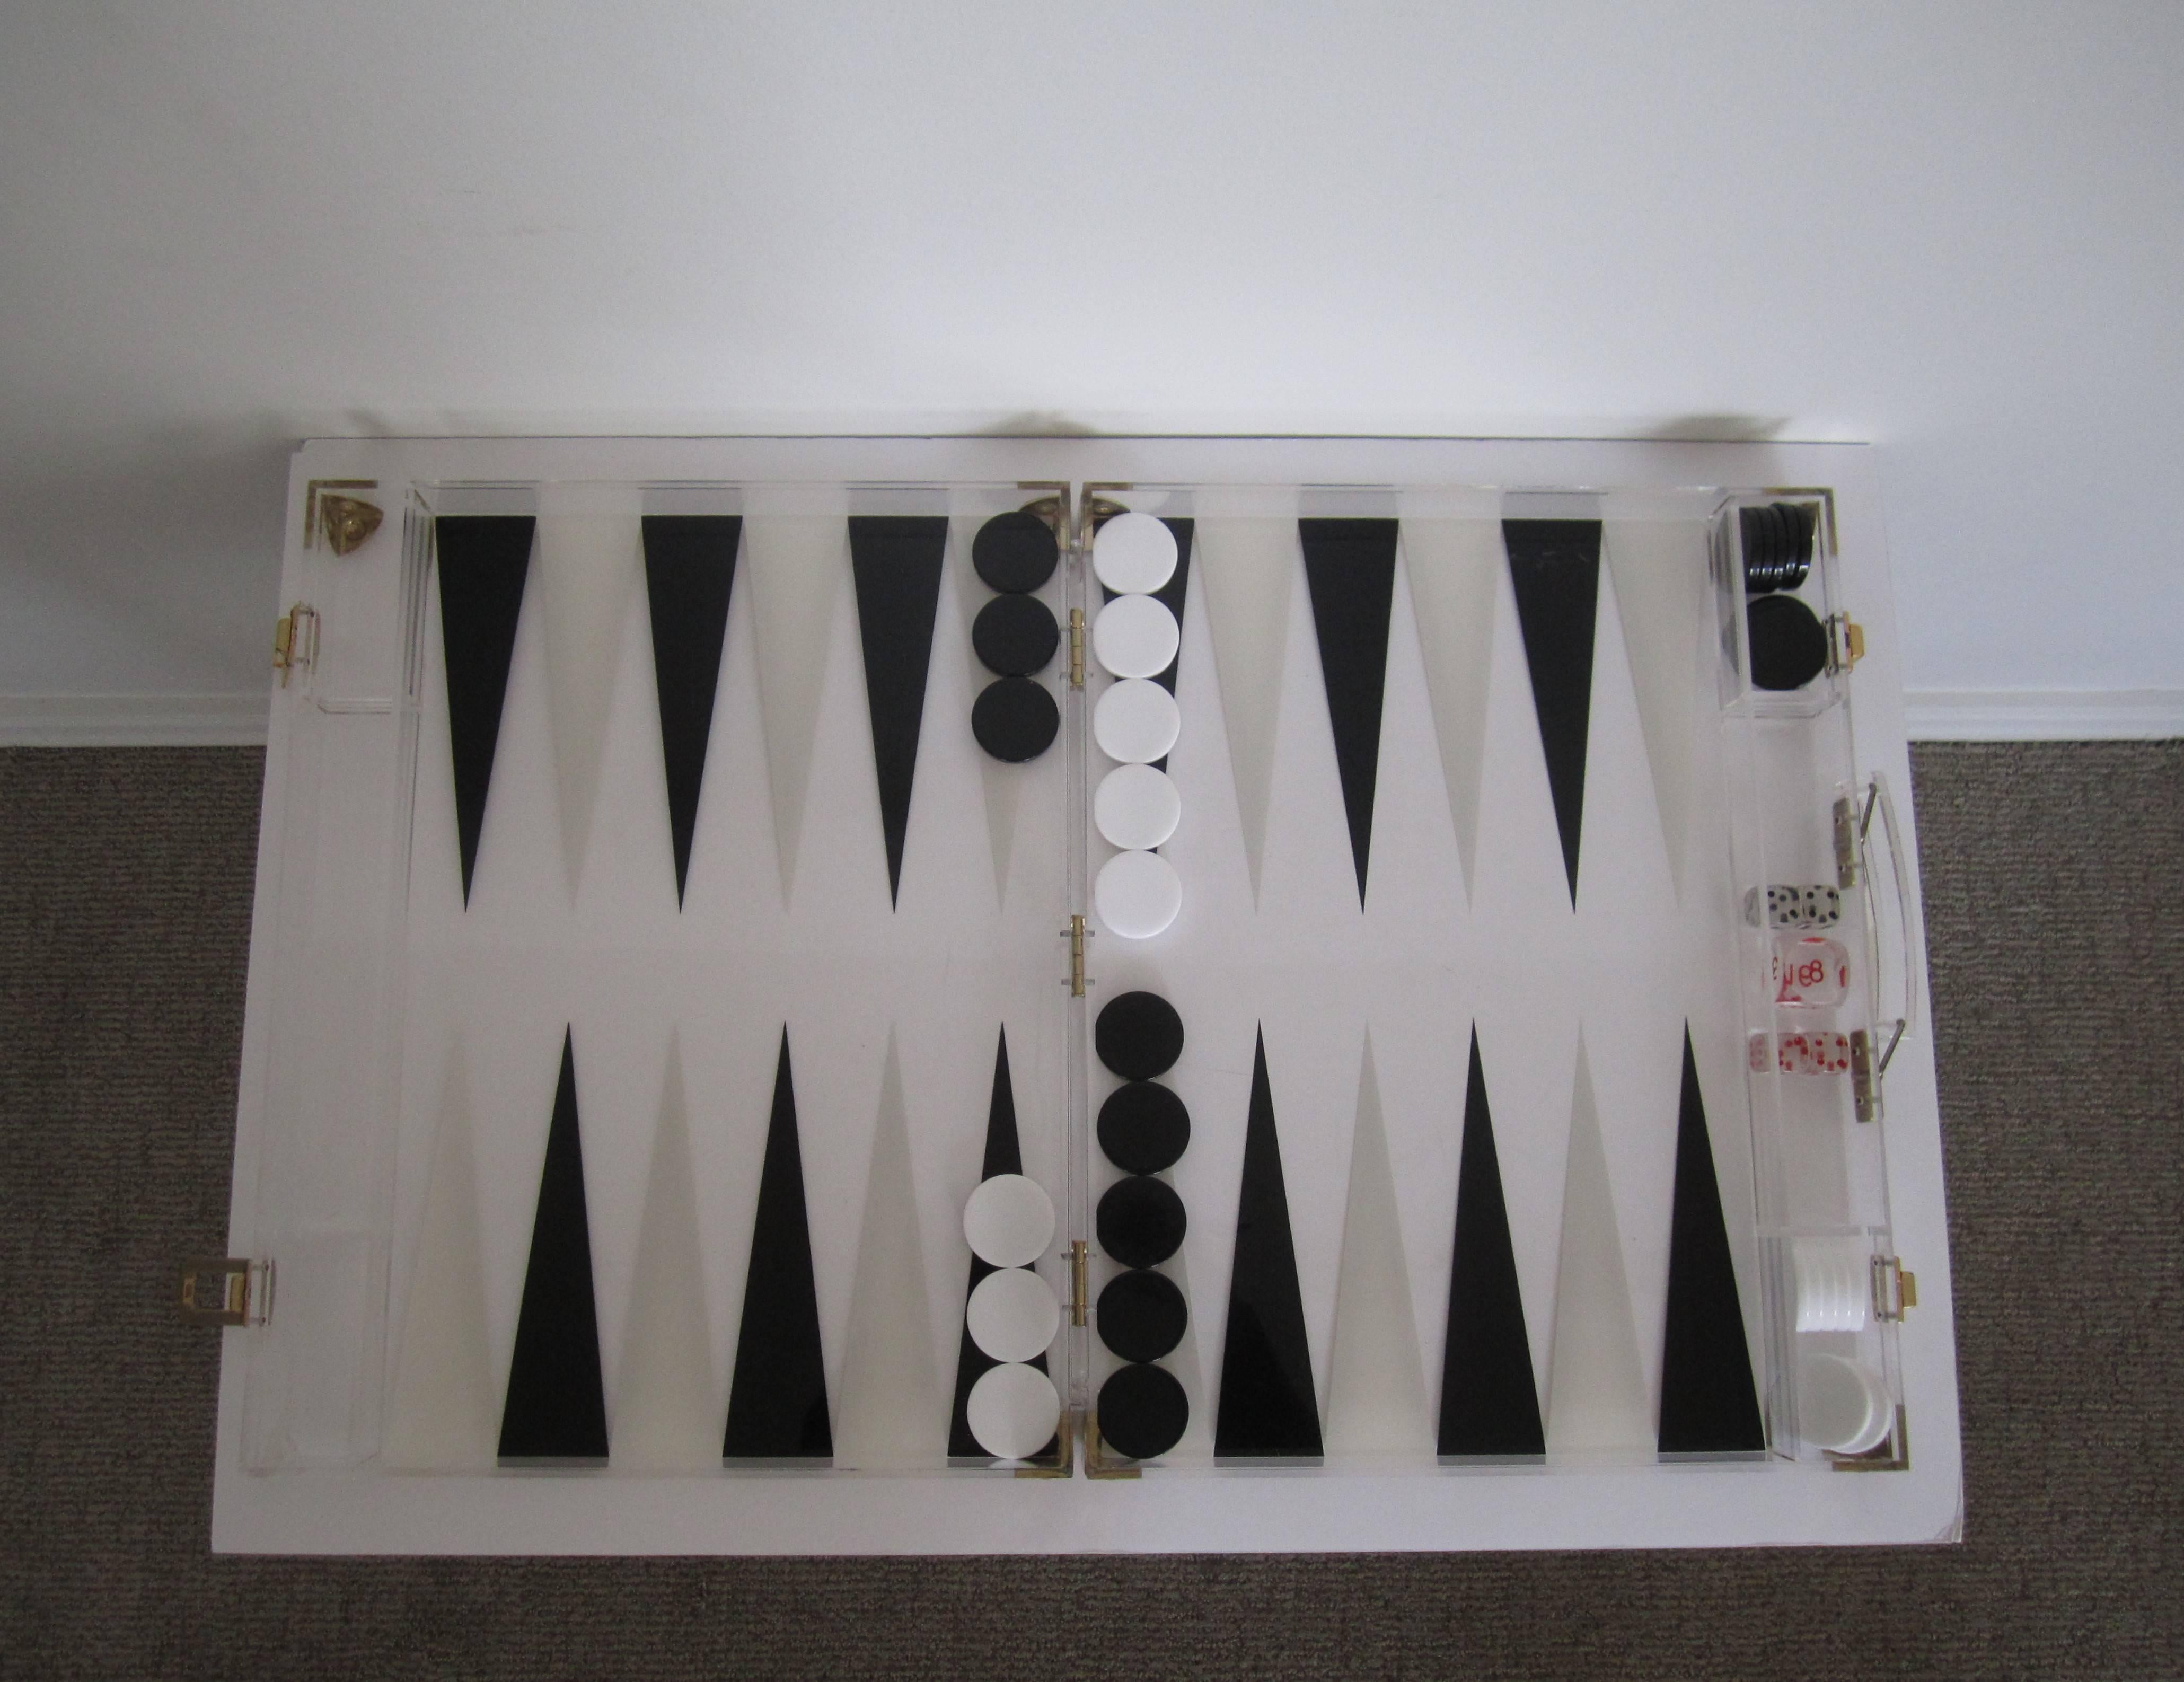 A vintage black and white backgammon game set in a portable acrylic case. Acrylic case is the game board. All pieces accounted for. Made in France, with maker's mark as seen in image. Circa 1970s. Measurements: Closed: 2.75